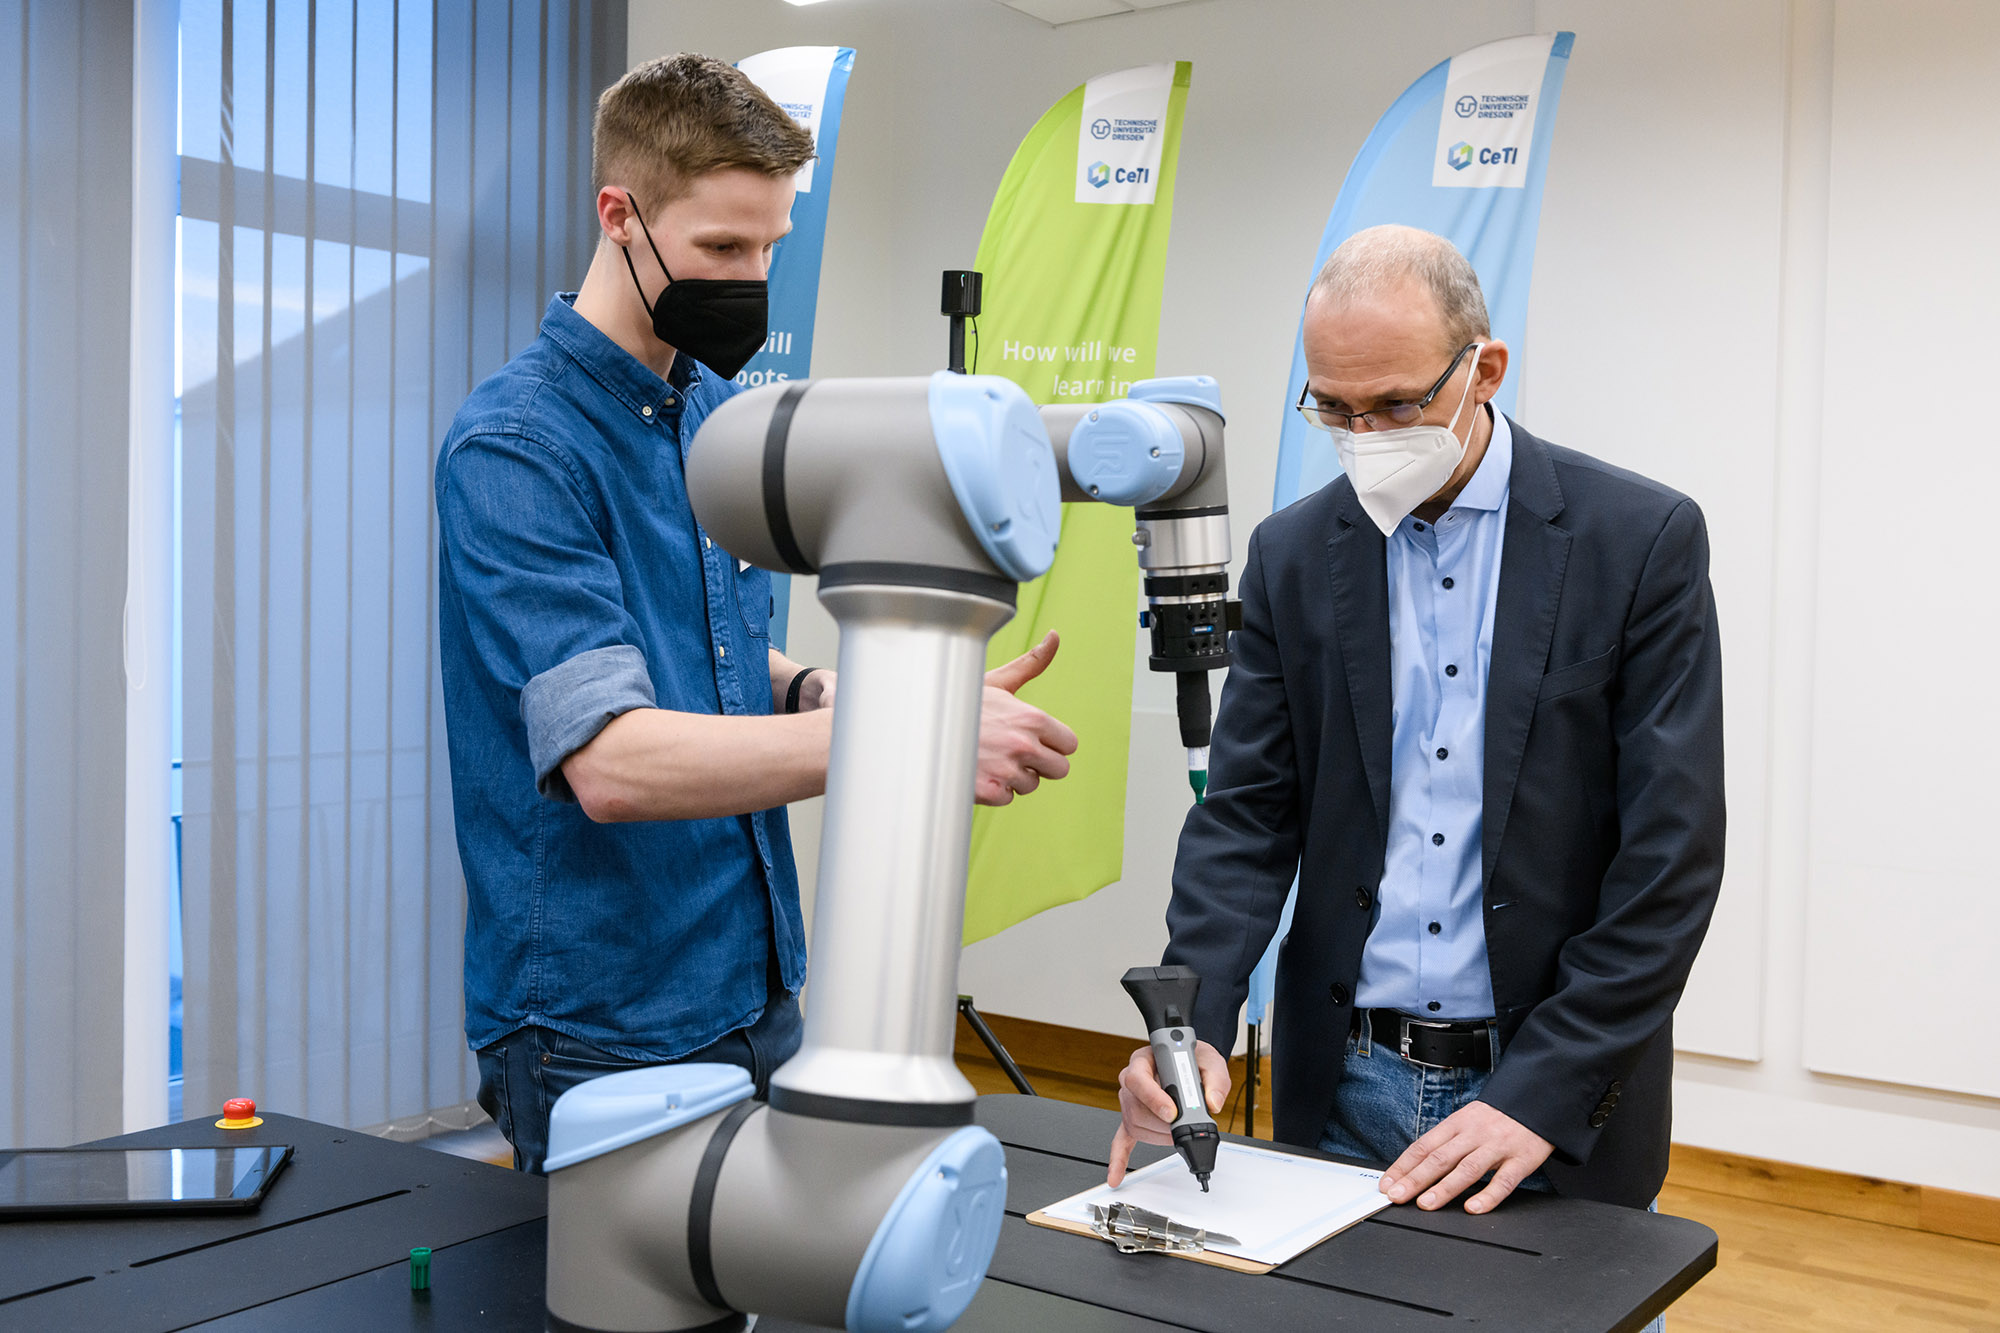 Photograph of two men next to a robotic arm, one of them is holding a smart pen